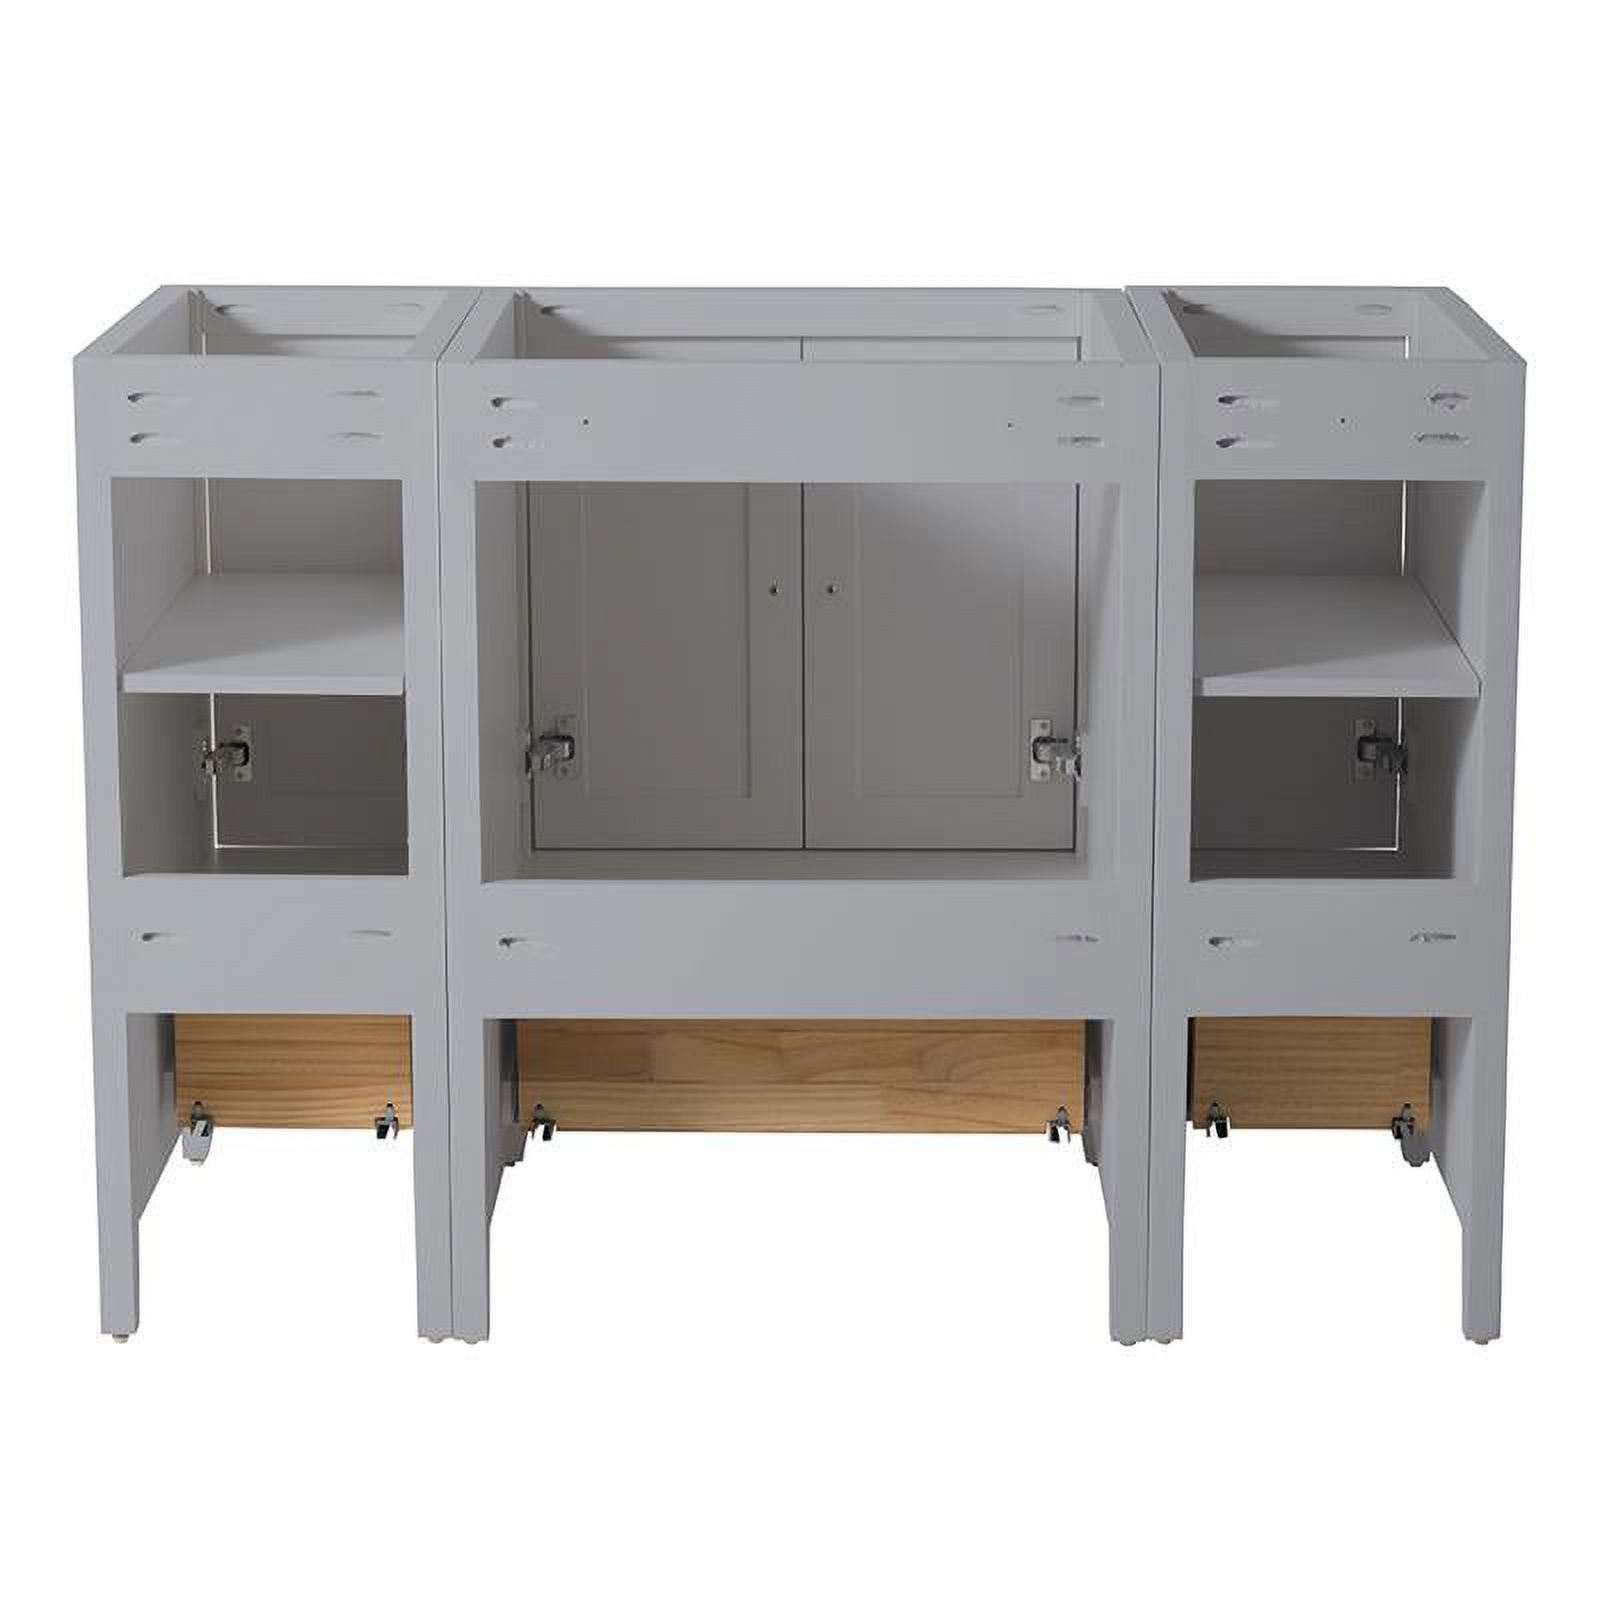 Fresca Oxford 48" 3-drawer Traditional Wood Bathroom Cabinet in Gray - image 4 of 4